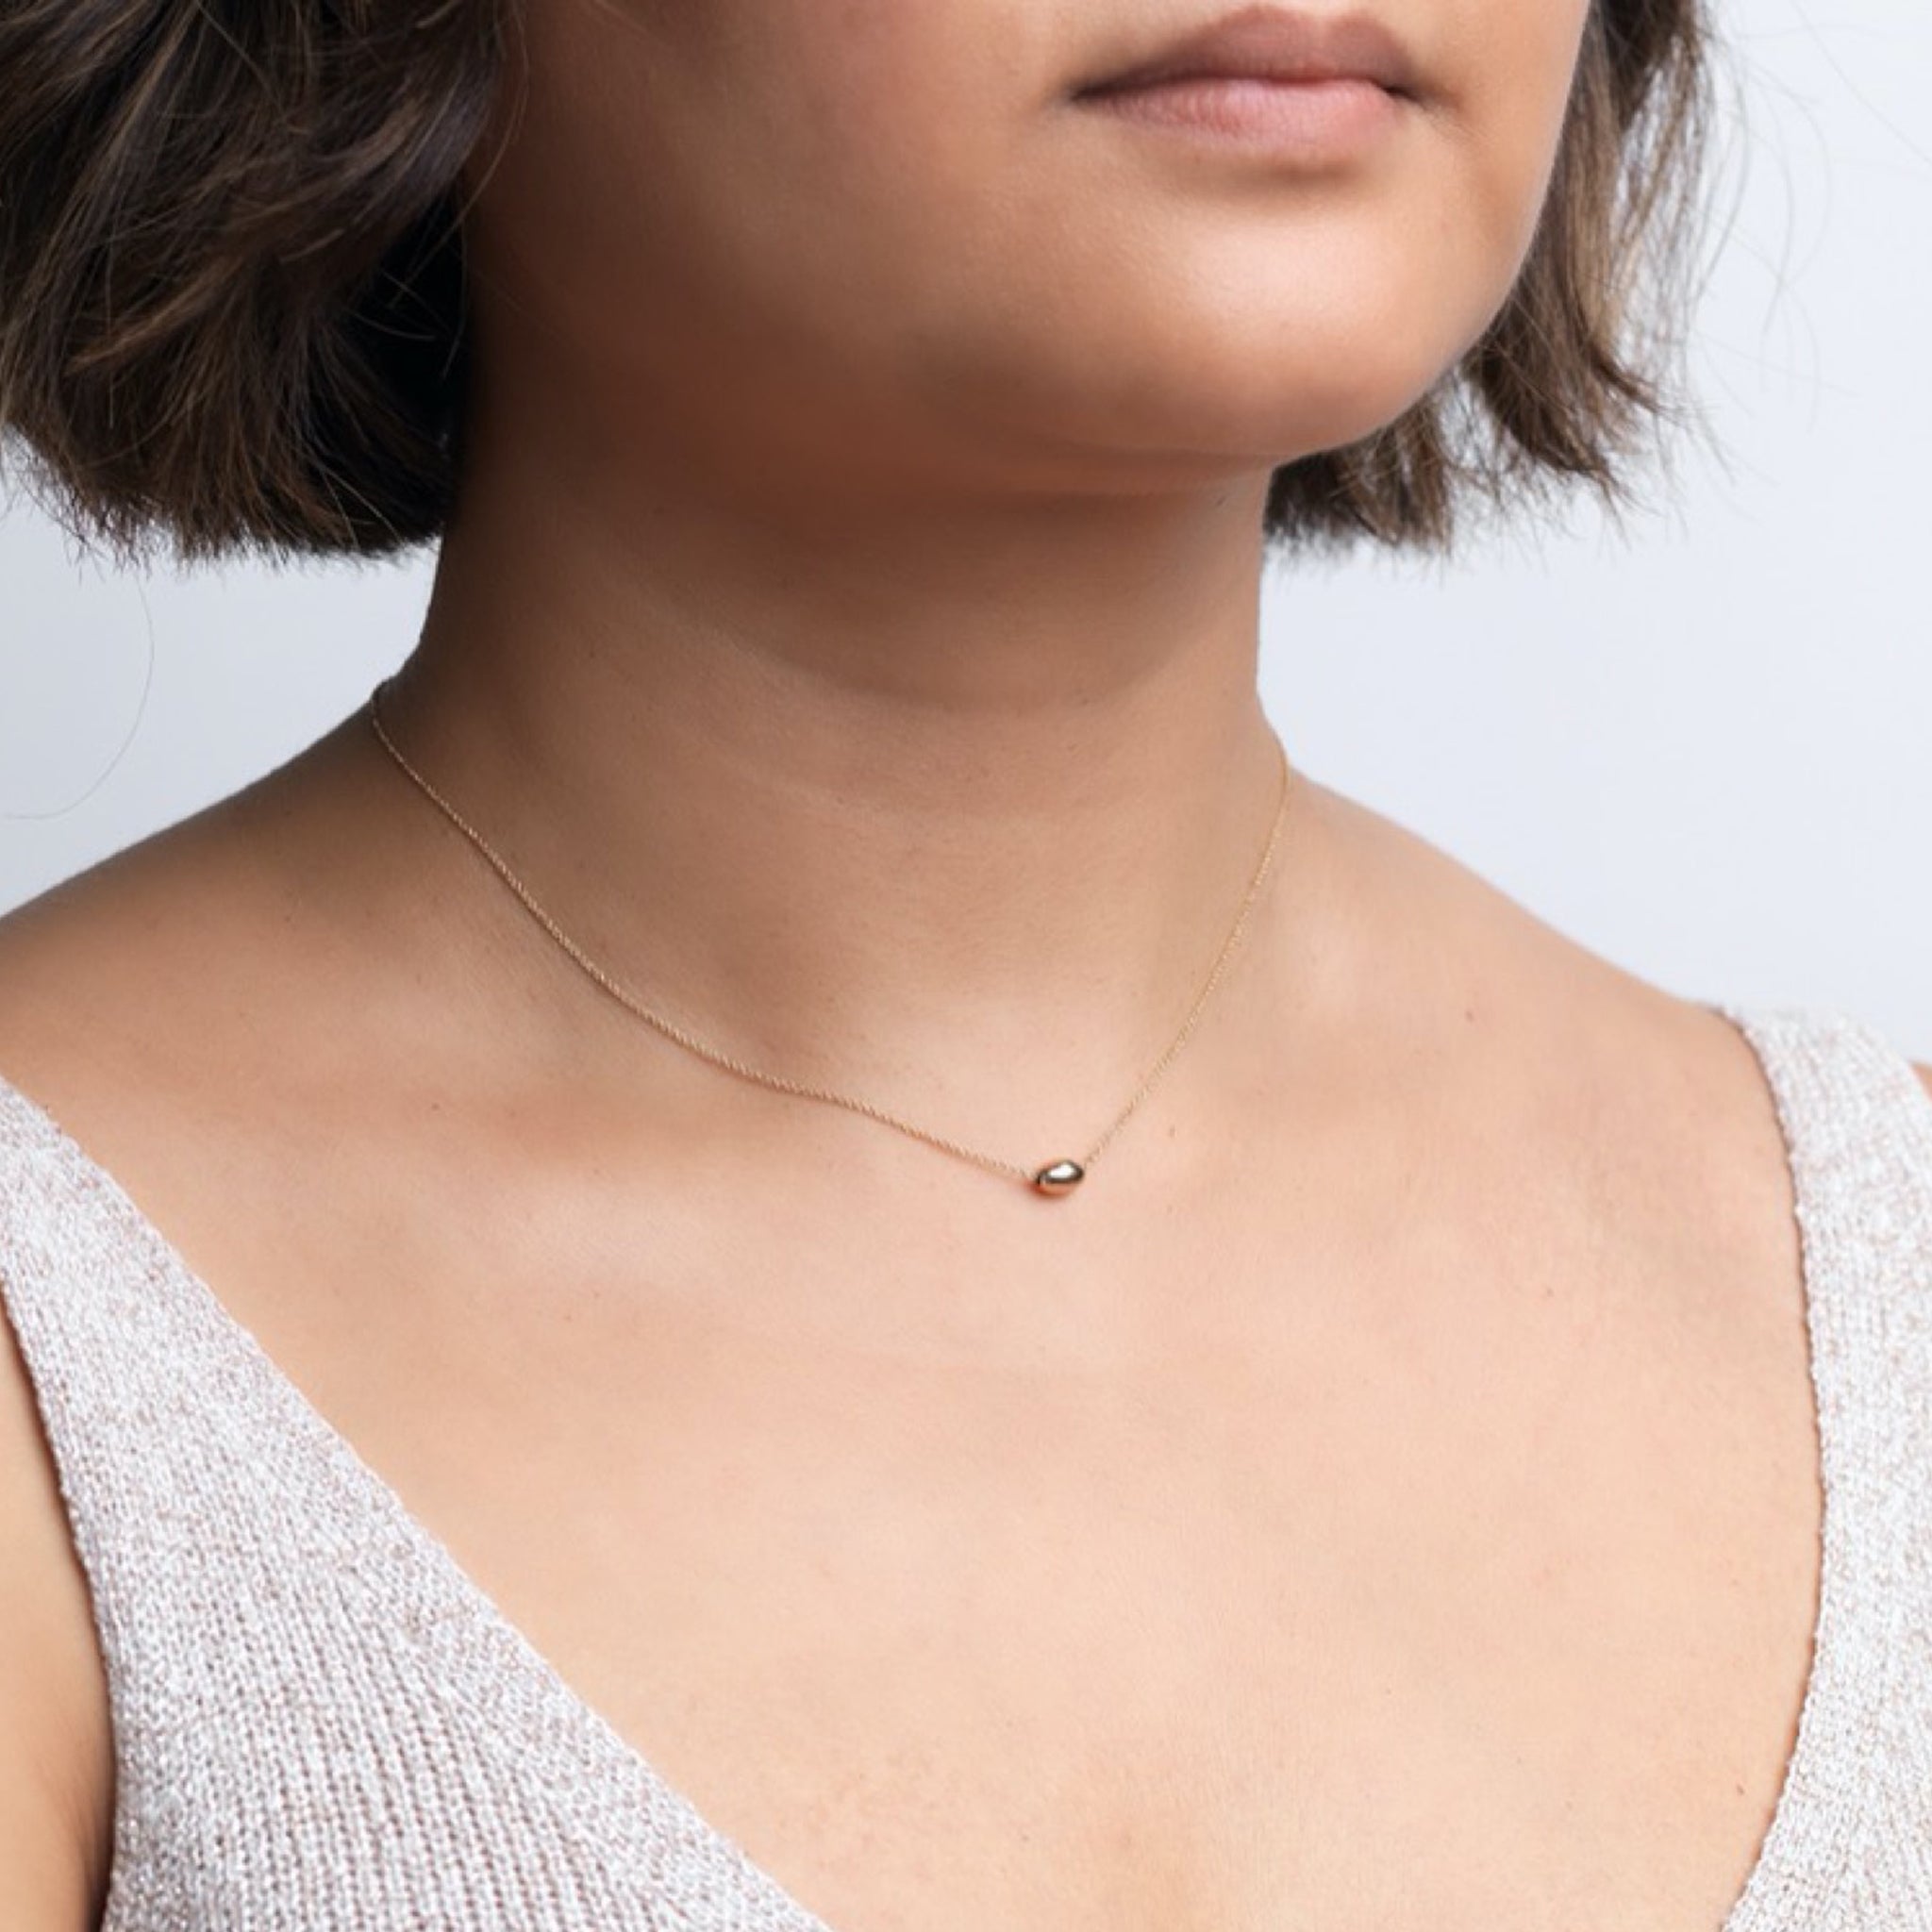 The Straits Finery minimalist necklace in 14k solid gold with fine chain and gold bead